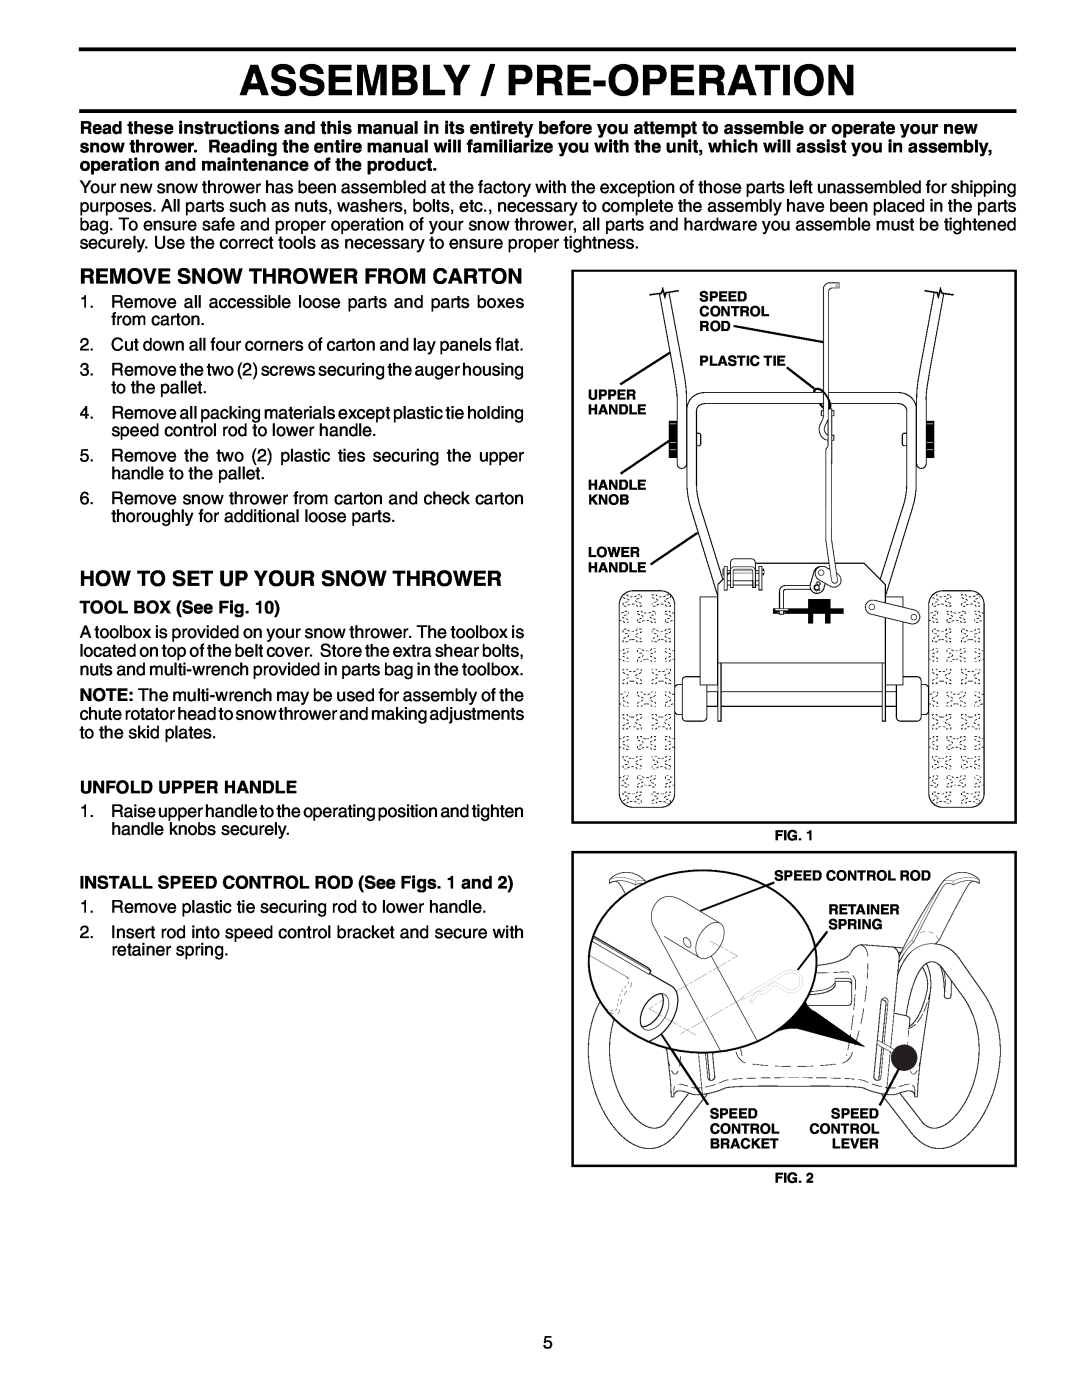 Husqvarna 8527SBEB owner manual Assembly / Pre-Operation, Remove Snow Thrower From Carton, How To Set Up Your Snow Thrower 